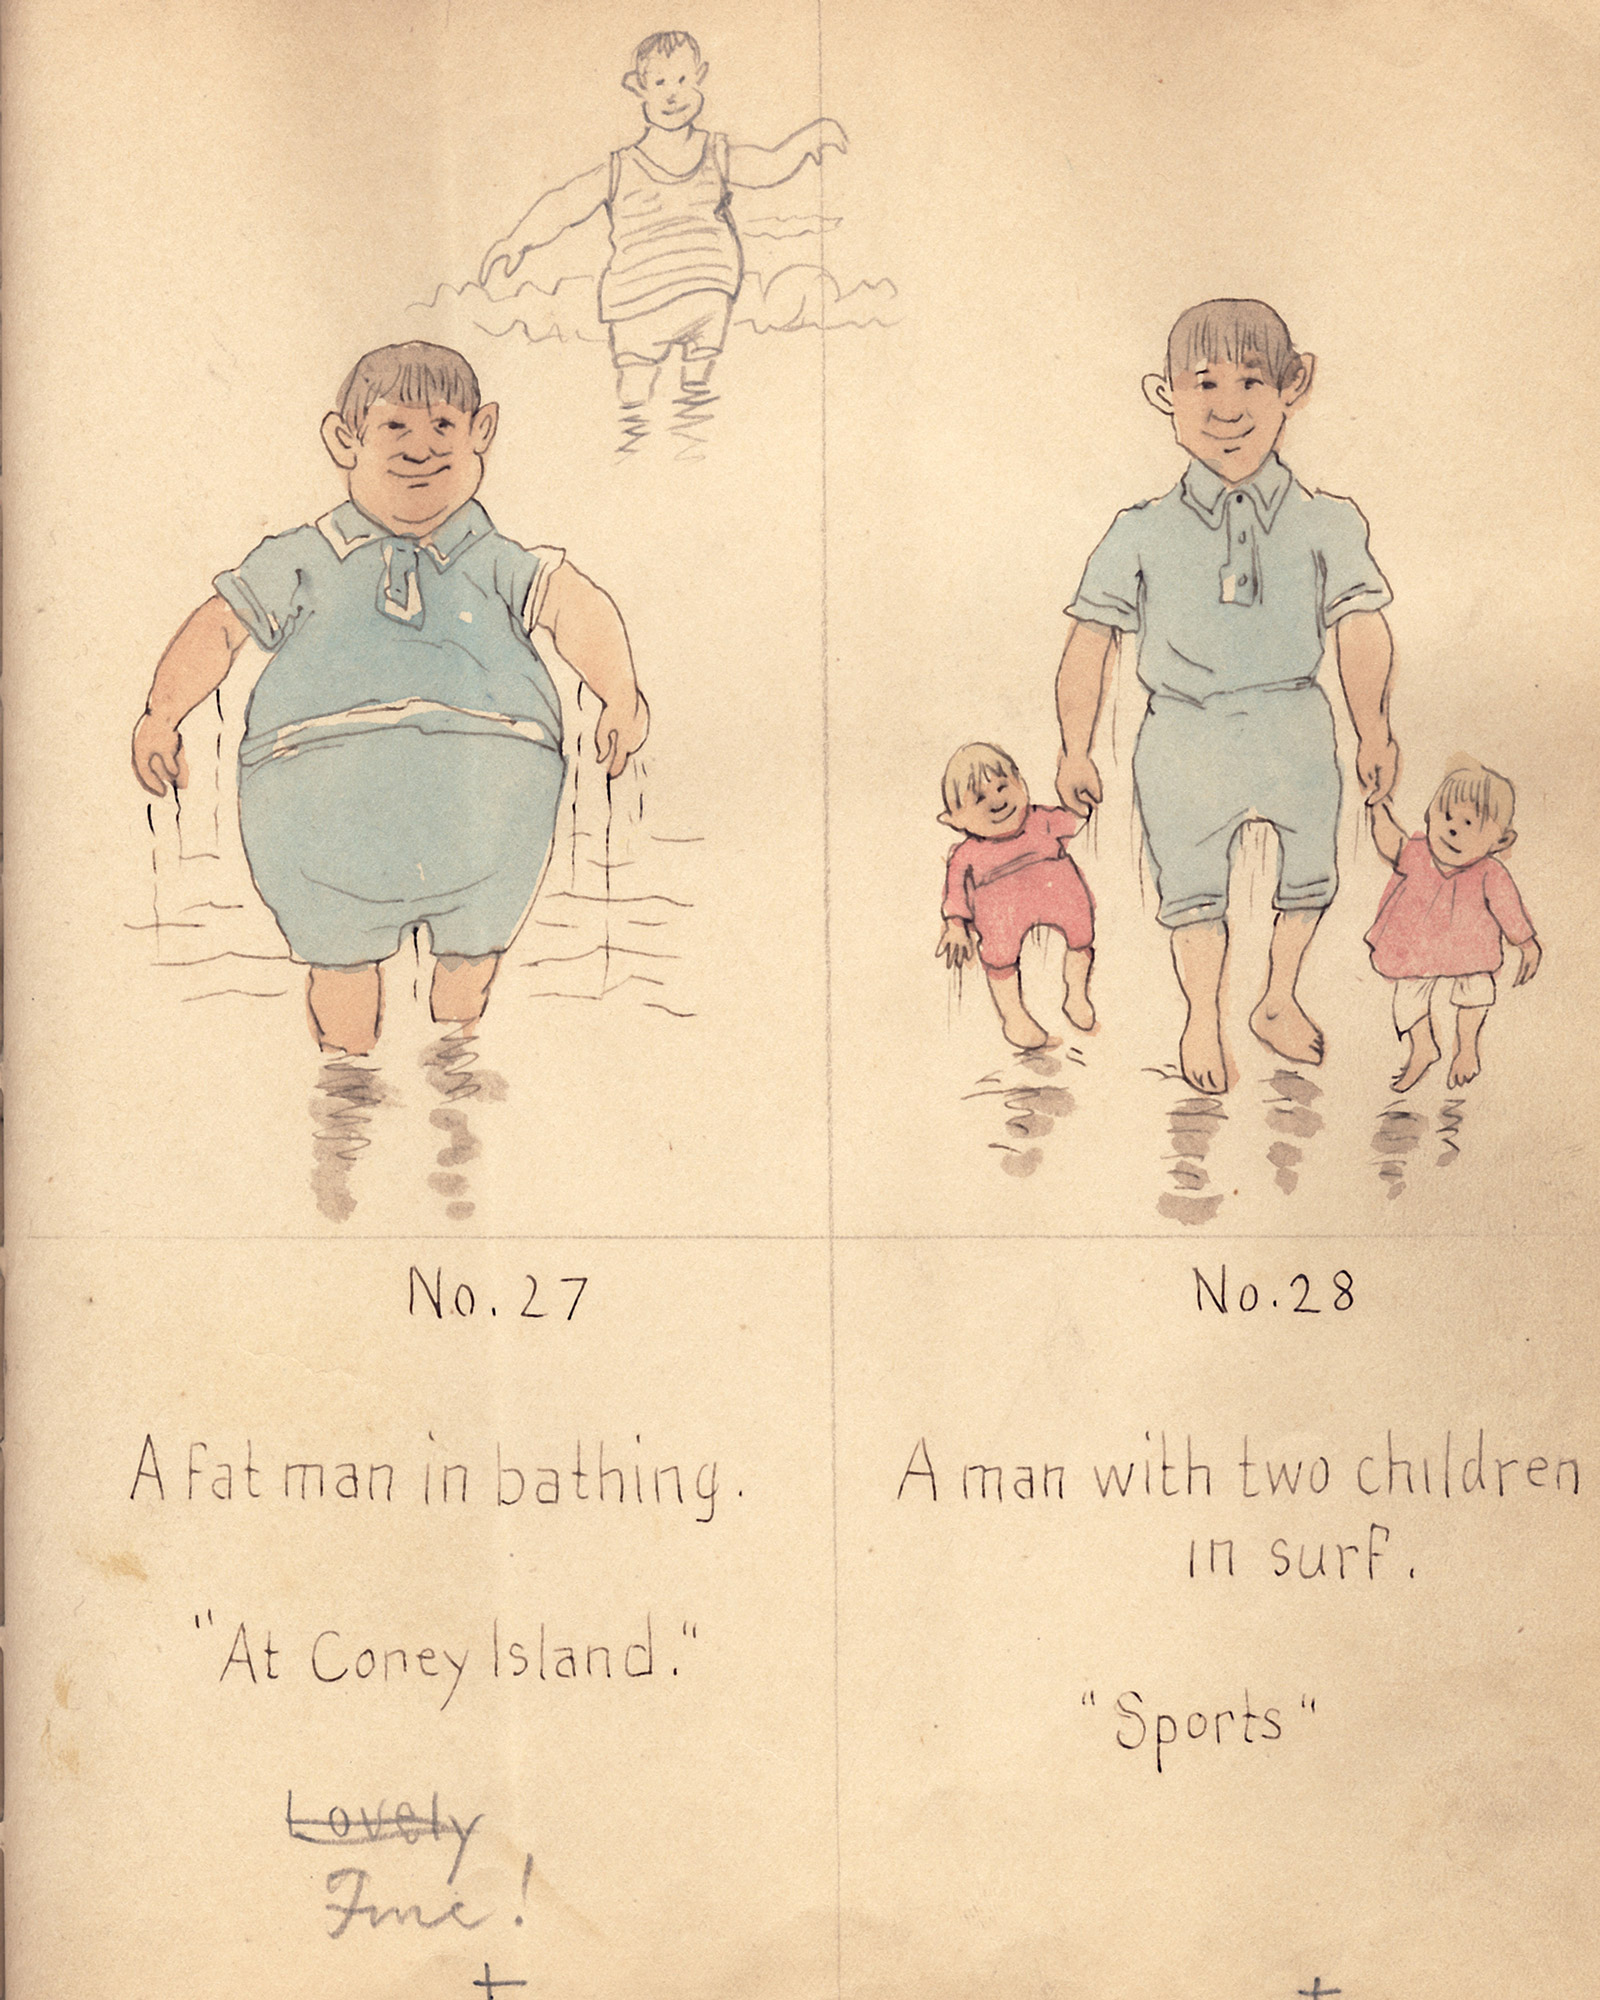 An image circa 1890 from Cassius M. Coolidge's sketchbook, featuring a fat man in a bathing suit and a man with two children in the surf.